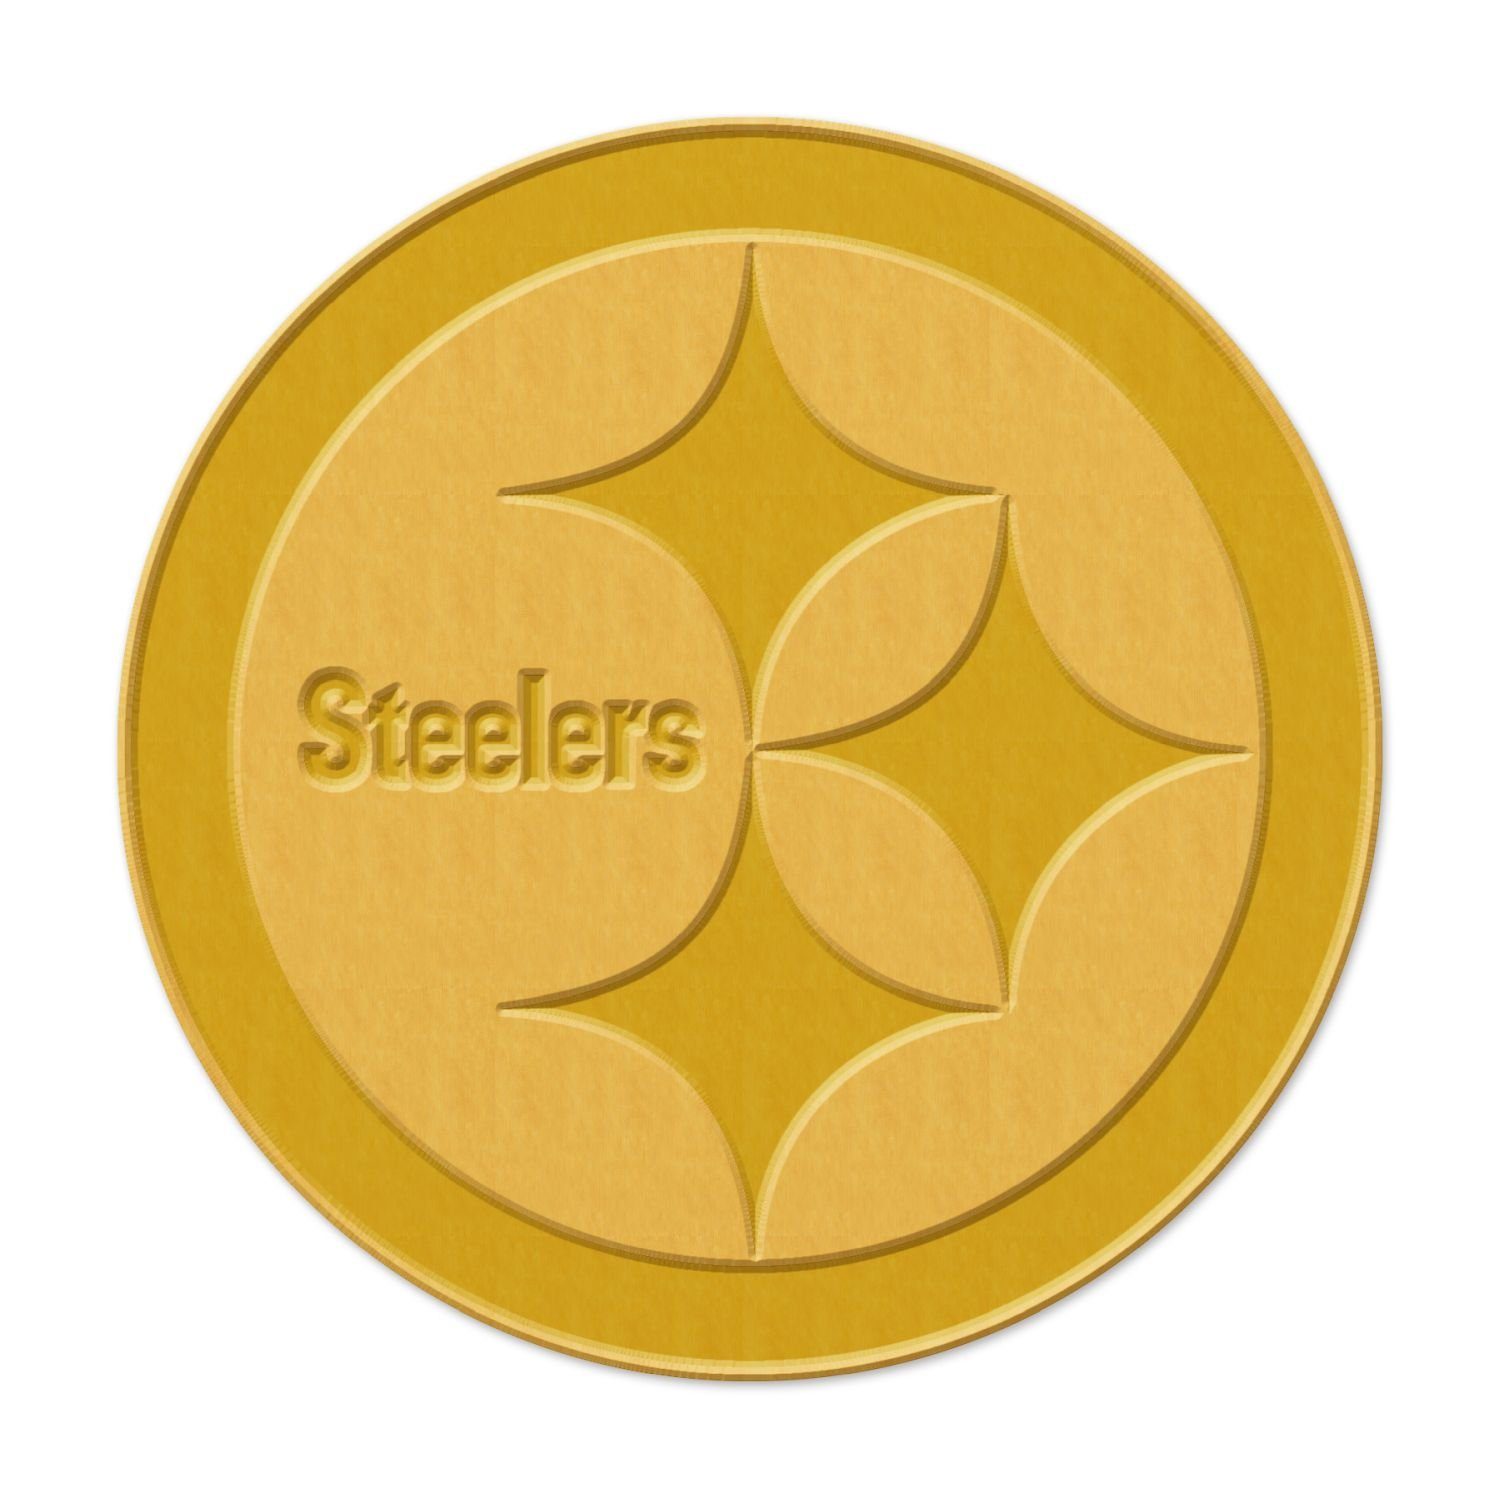 PIN Caps NFL Steelers Pittsburgh Teams WinCraft Pins GOLD Schmuck Universal